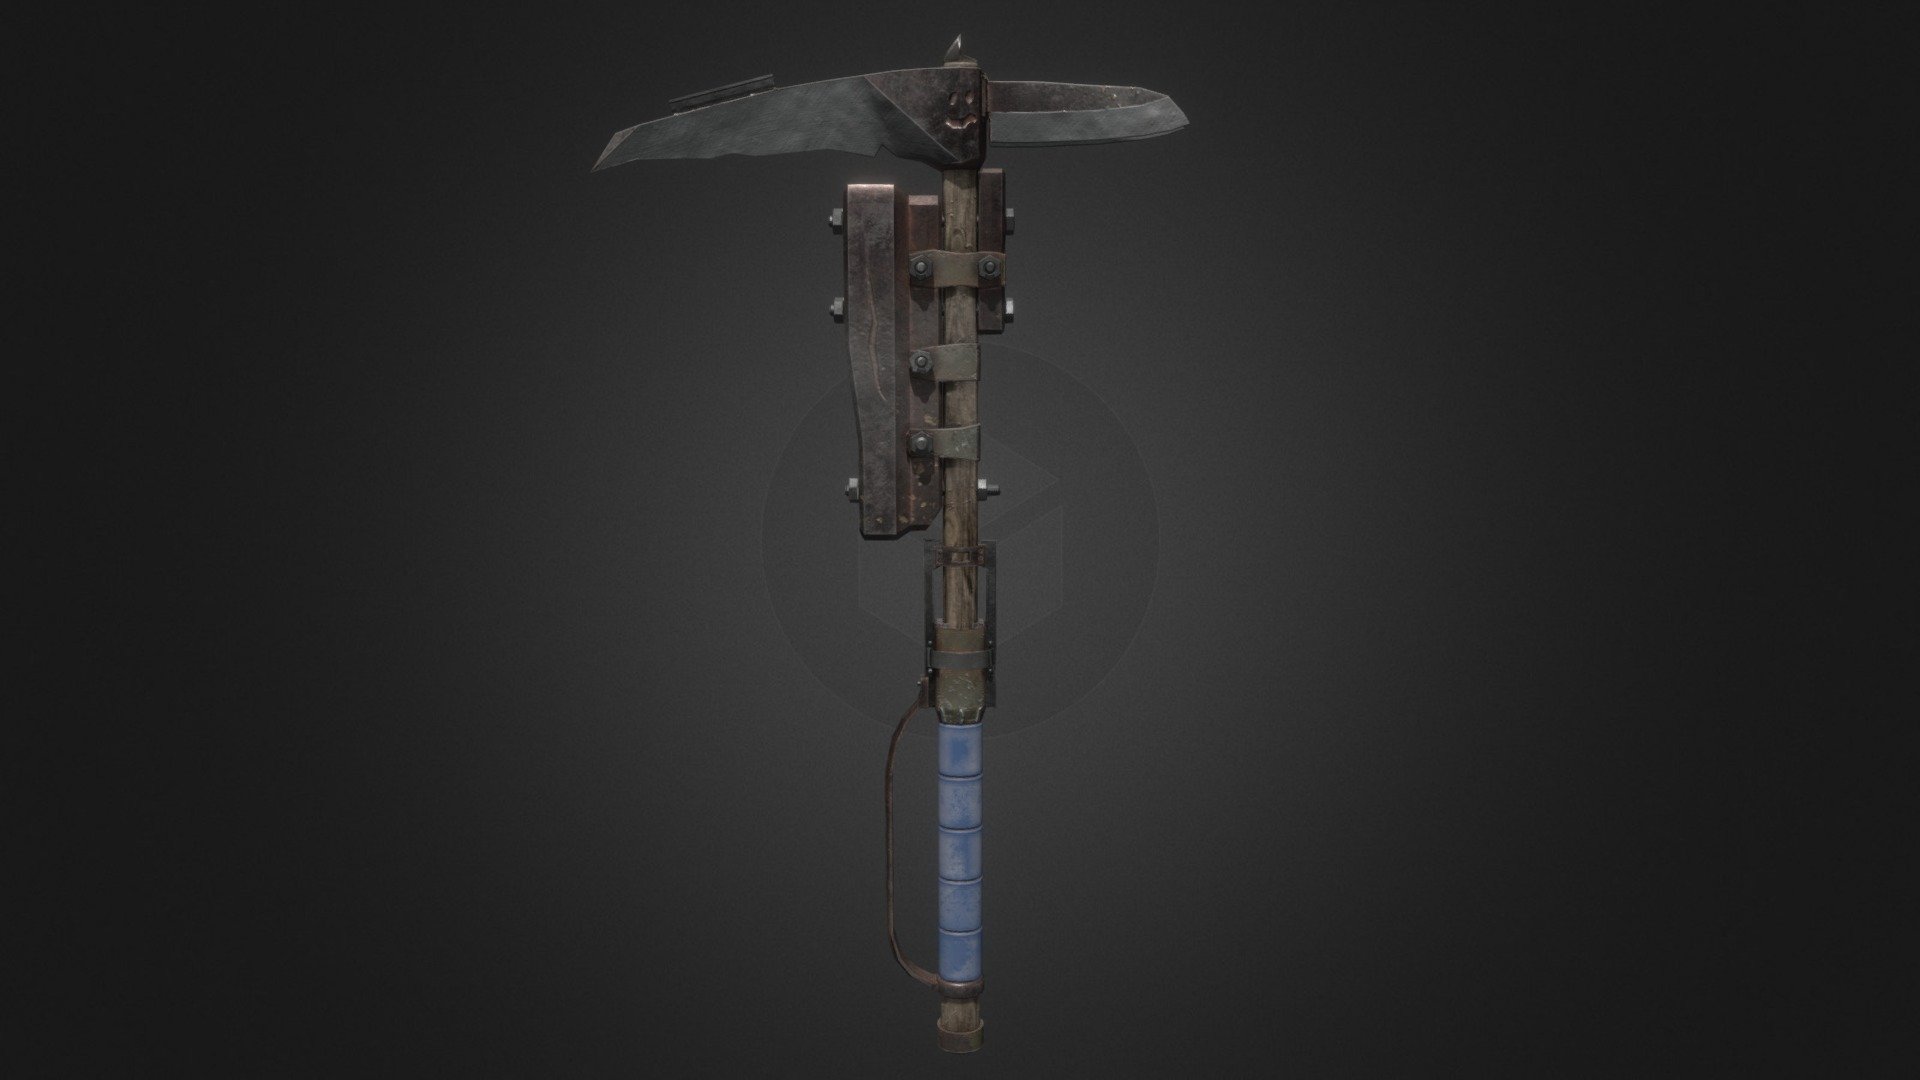 Gameready postapocalyptic Weapon for FPS

It's part of the asset, which i would create later for the store 3d model